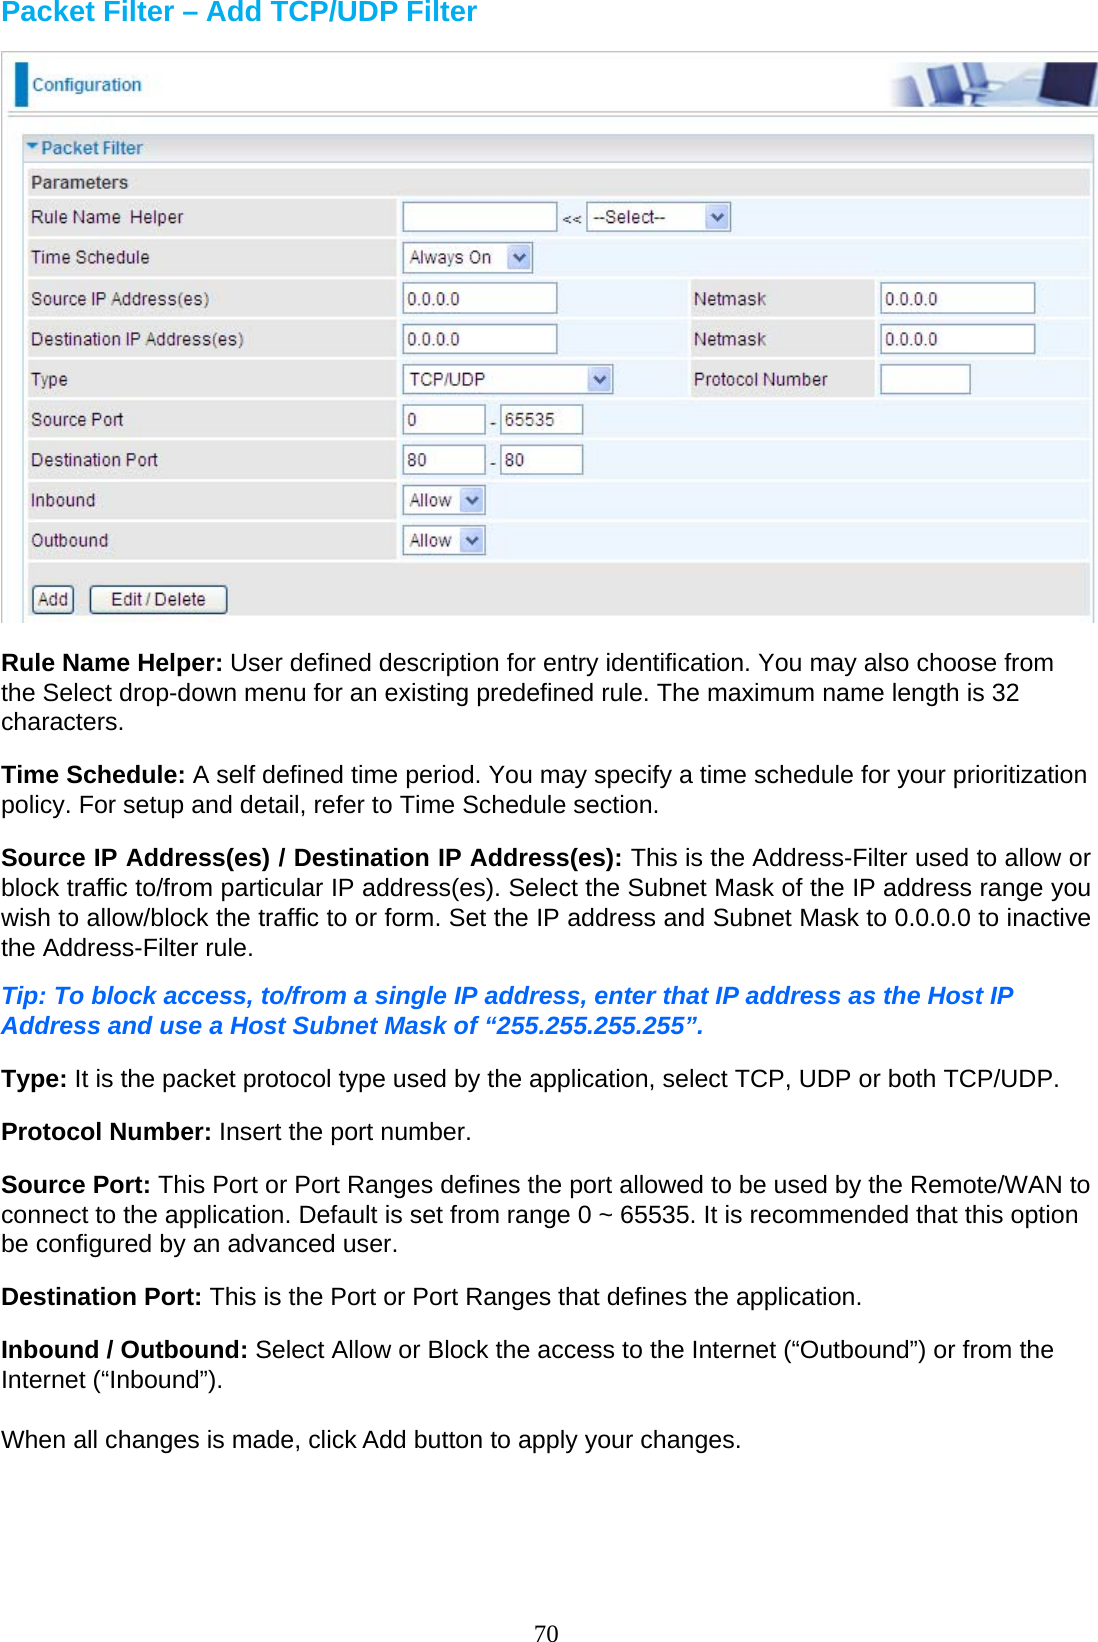 70 Packet Filter – Add TCP/UDP Filter    Rule Name Helper: User defined description for entry identification. You may also choose from the Select drop-down menu for an existing predefined rule. The maximum name length is 32 characters.  Time Schedule: A self defined time period. You may specify a time schedule for your prioritization policy. For setup and detail, refer to Time Schedule section.  Source IP Address(es) / Destination IP Address(es): This is the Address-Filter used to allow or block traffic to/from particular IP address(es). Select the Subnet Mask of the IP address range you wish to allow/block the traffic to or form. Set the IP address and Subnet Mask to 0.0.0.0 to inactive the Address-Filter rule.  Tip: To block access, to/from a single IP address, enter that IP address as the Host IP Address and use a Host Subnet Mask of “255.255.255.255”.  Type: It is the packet protocol type used by the application, select TCP, UDP or both TCP/UDP.  Protocol Number: Insert the port number.  Source Port: This Port or Port Ranges defines the port allowed to be used by the Remote/WAN to connect to the application. Default is set from range 0 ~ 65535. It is recommended that this option be configured by an advanced user.  Destination Port: This is the Port or Port Ranges that defines the application.  Inbound / Outbound: Select Allow or Block the access to the Internet (“Outbound”) or from the Internet (“Inbound”).  When all changes is made, click Add button to apply your changes. 